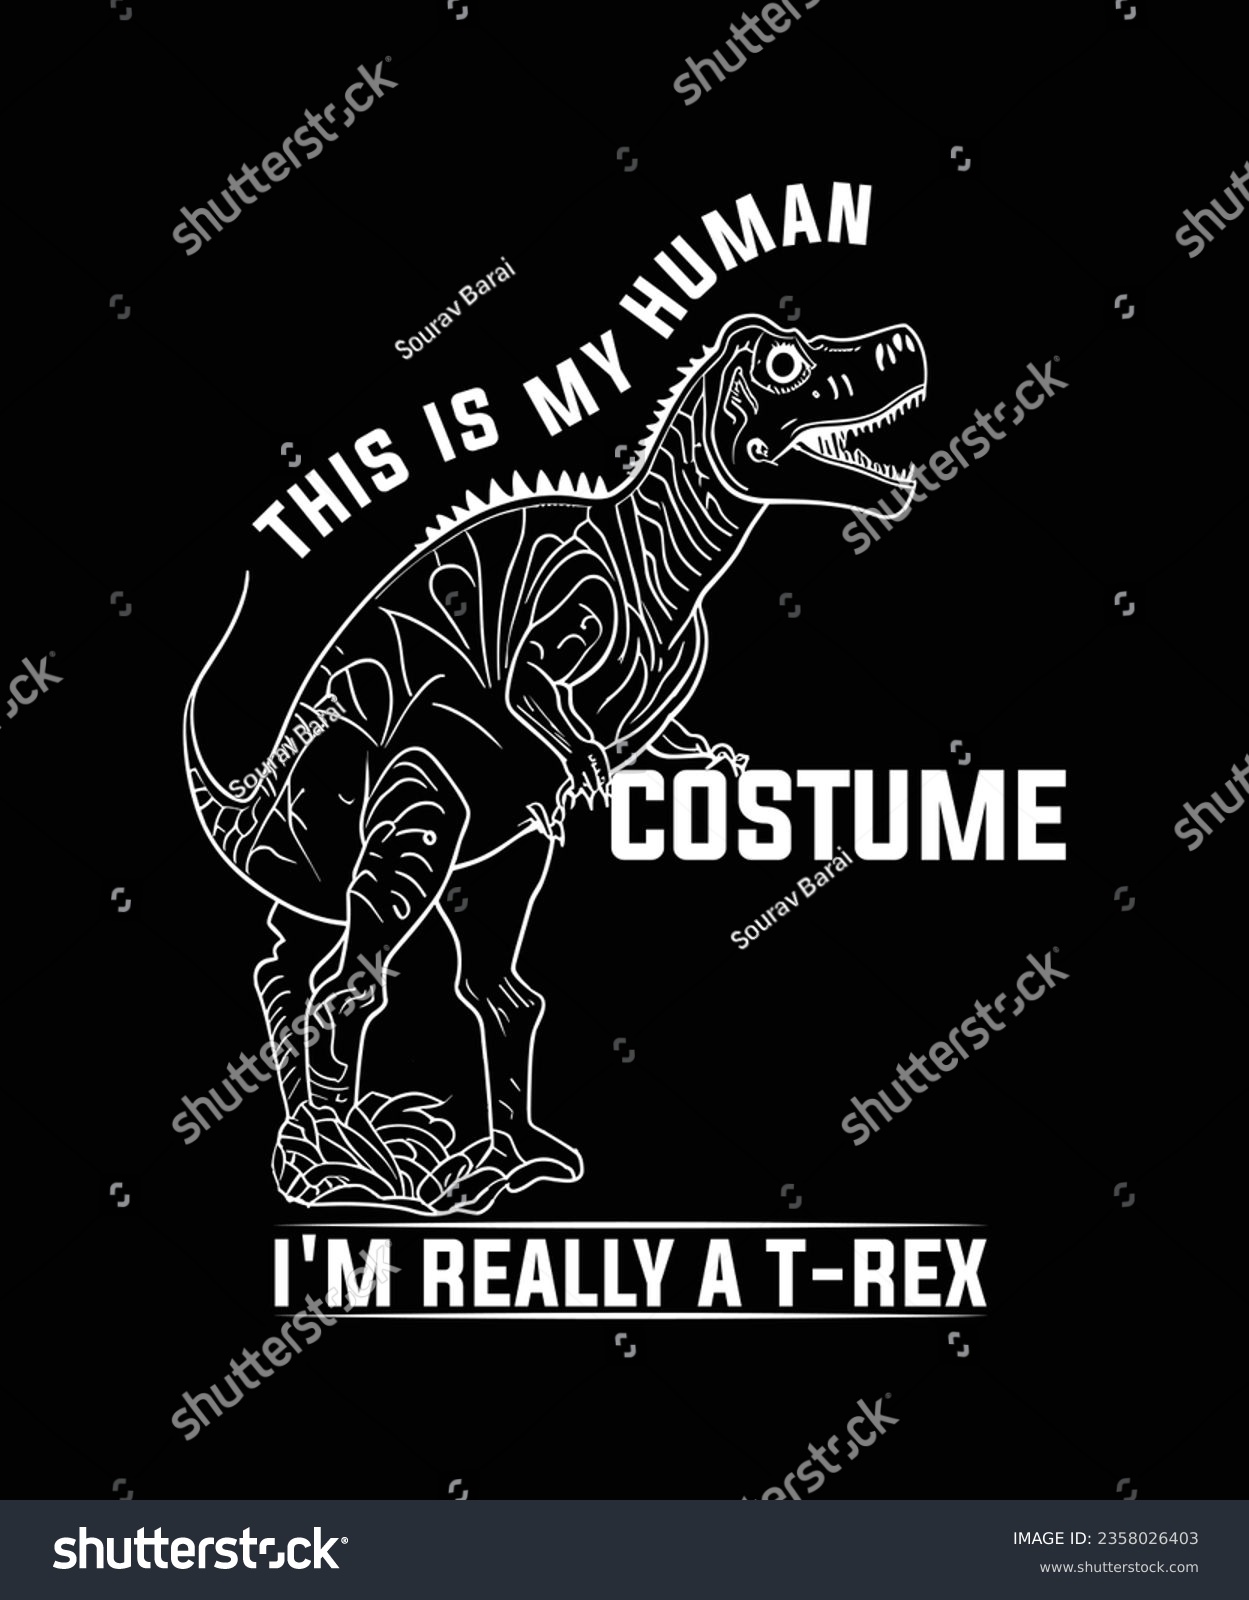 SVG of THIS IS MY HUMAN COSTUME I'M REALLY A T-REX TSHIRT DESIGN svg